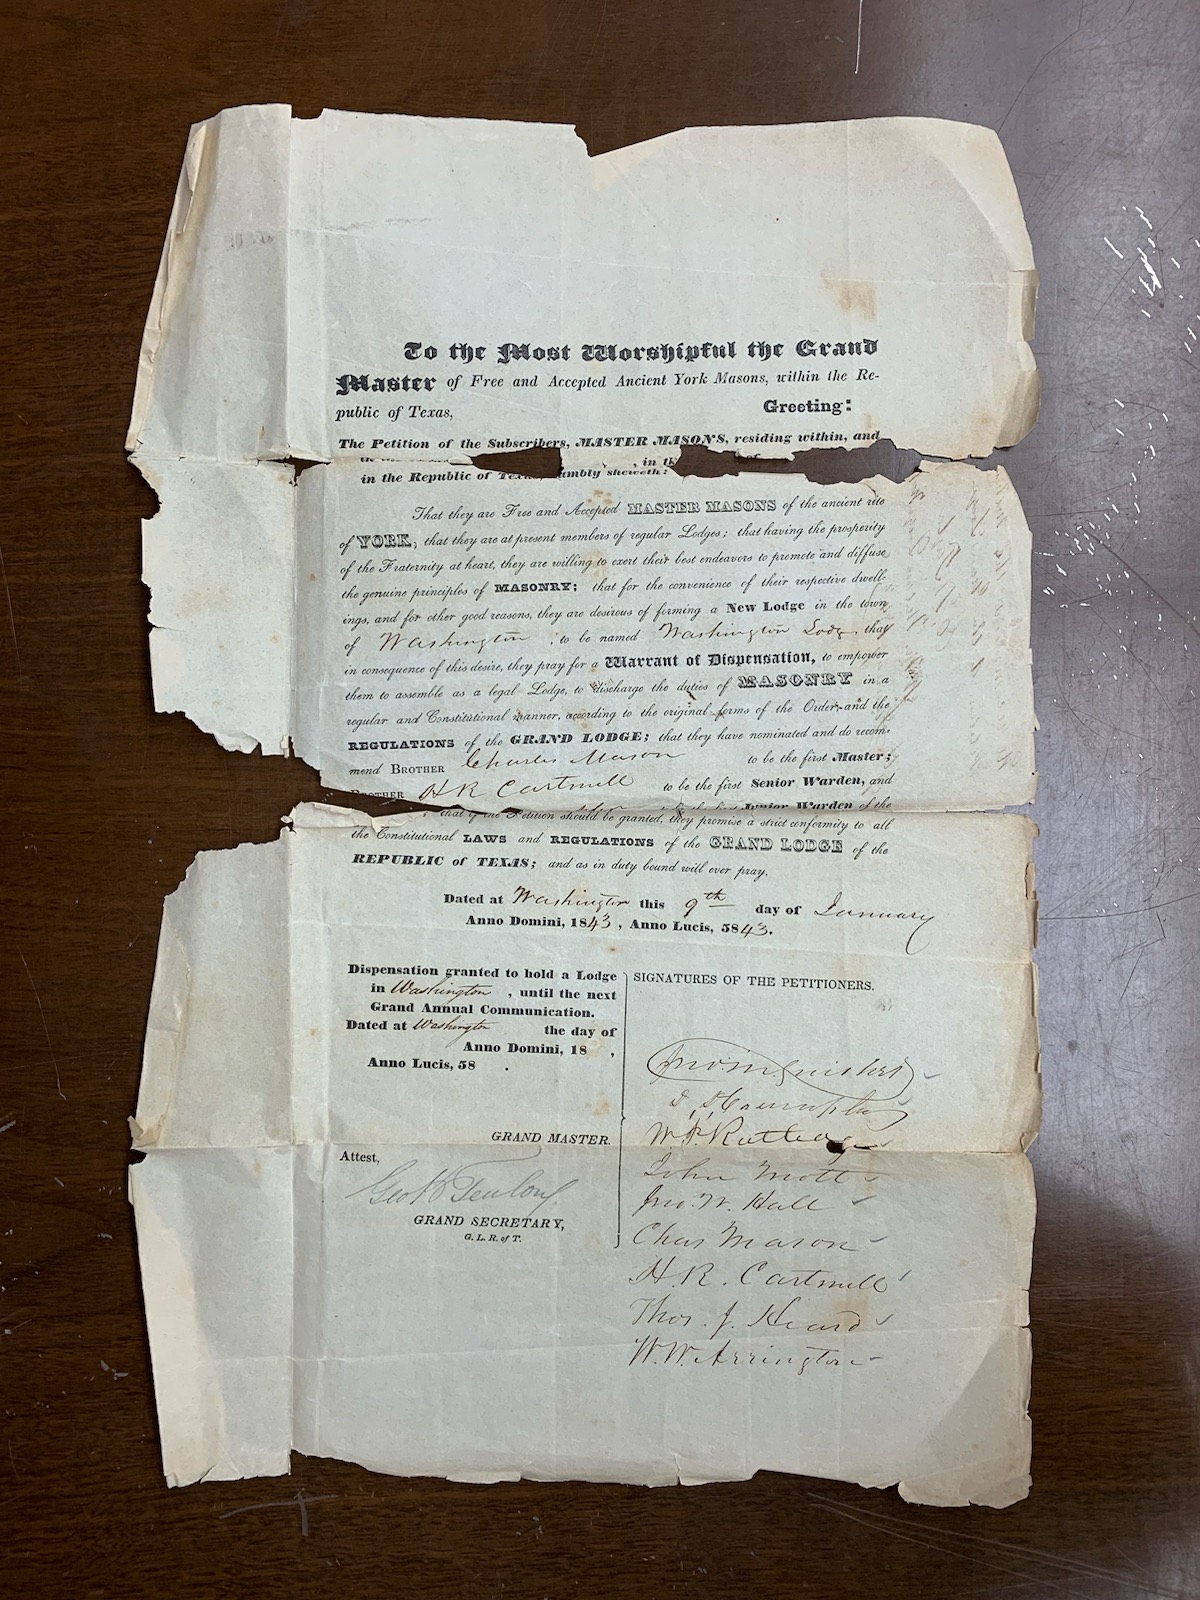 Warrant of Dispensation issued by the Grand Lodge of the Republic of Texas to Washington 
  Masonic Lodge #18 in 1843